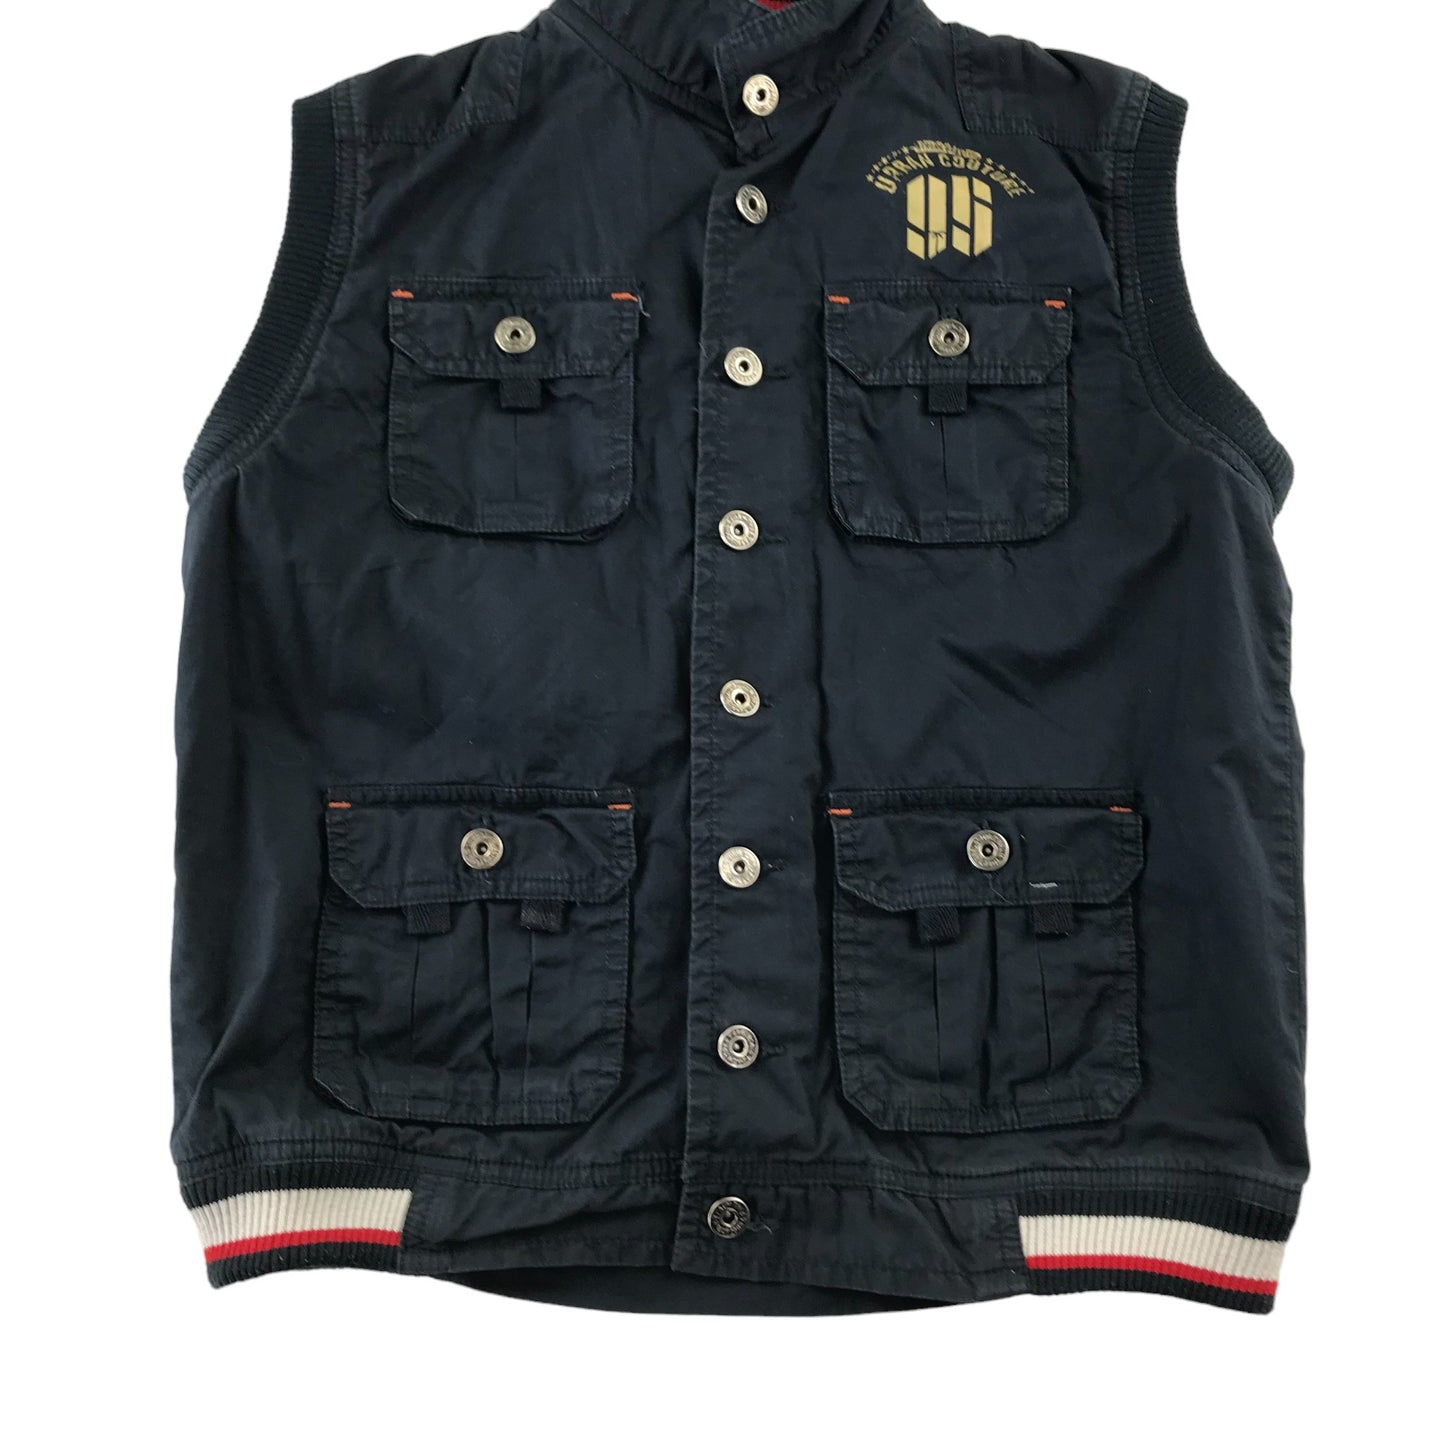 Palm Tree gilet 13-14 years navy blue bomber style casual cotton